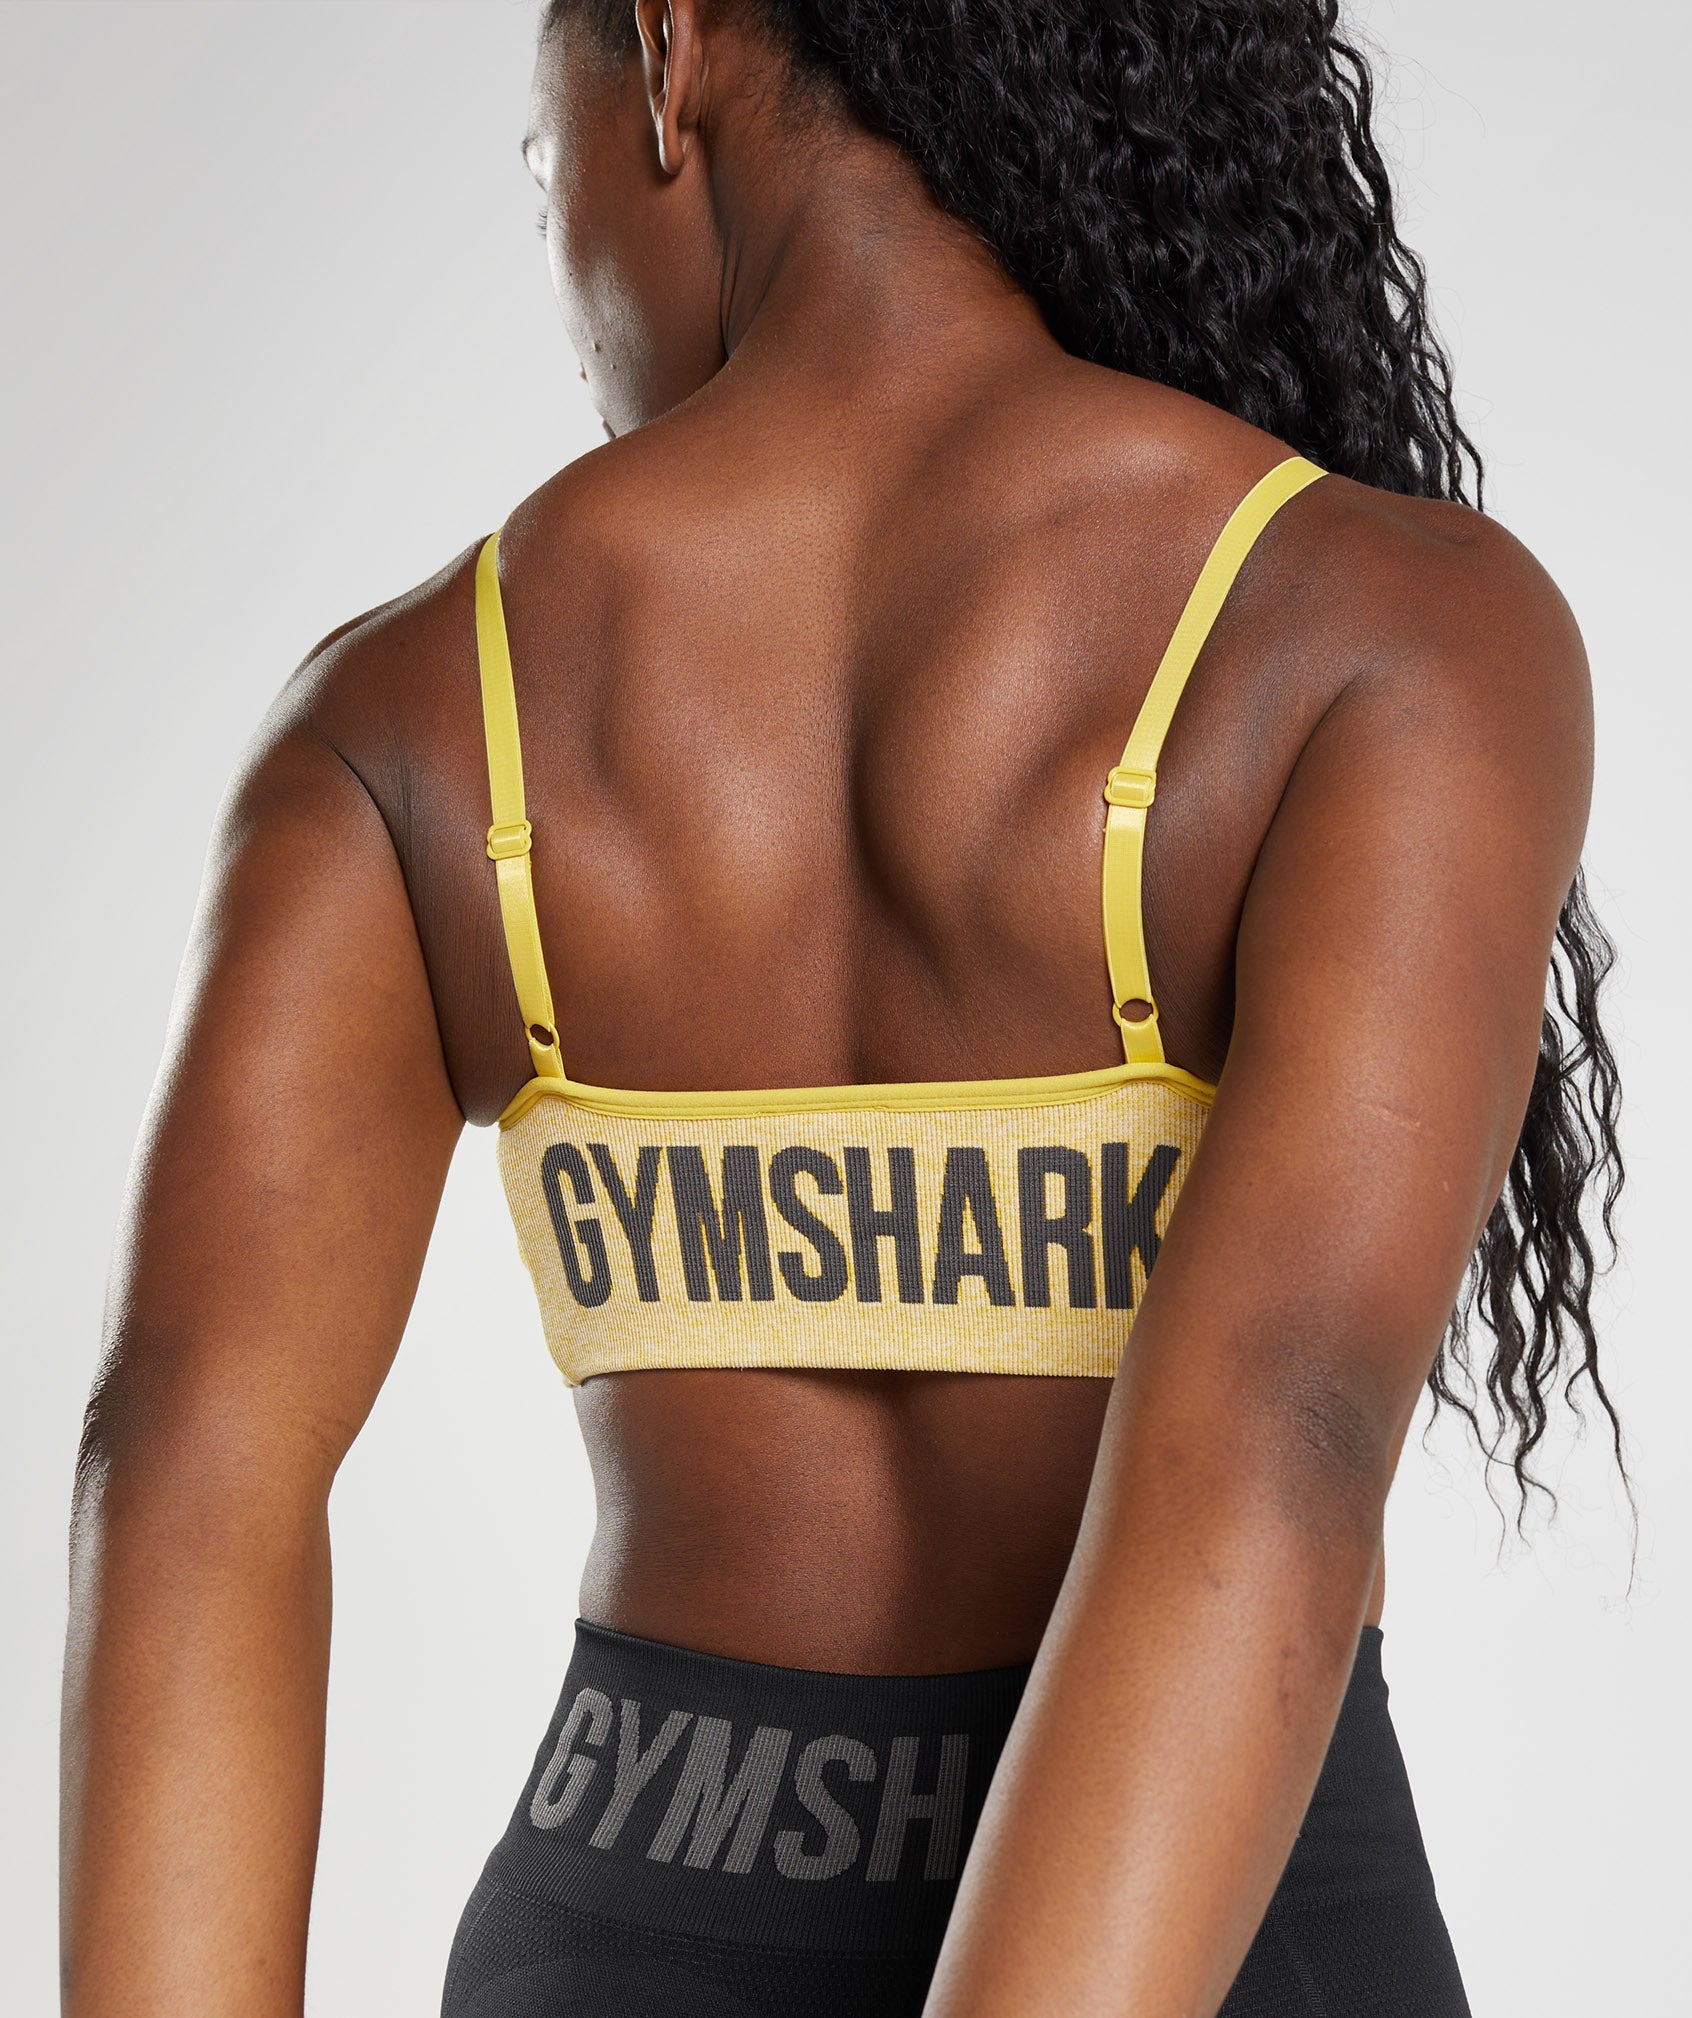 Gymshark Flex Strappy Sports Bra Gray - $35 New With Tags - From Kelsey